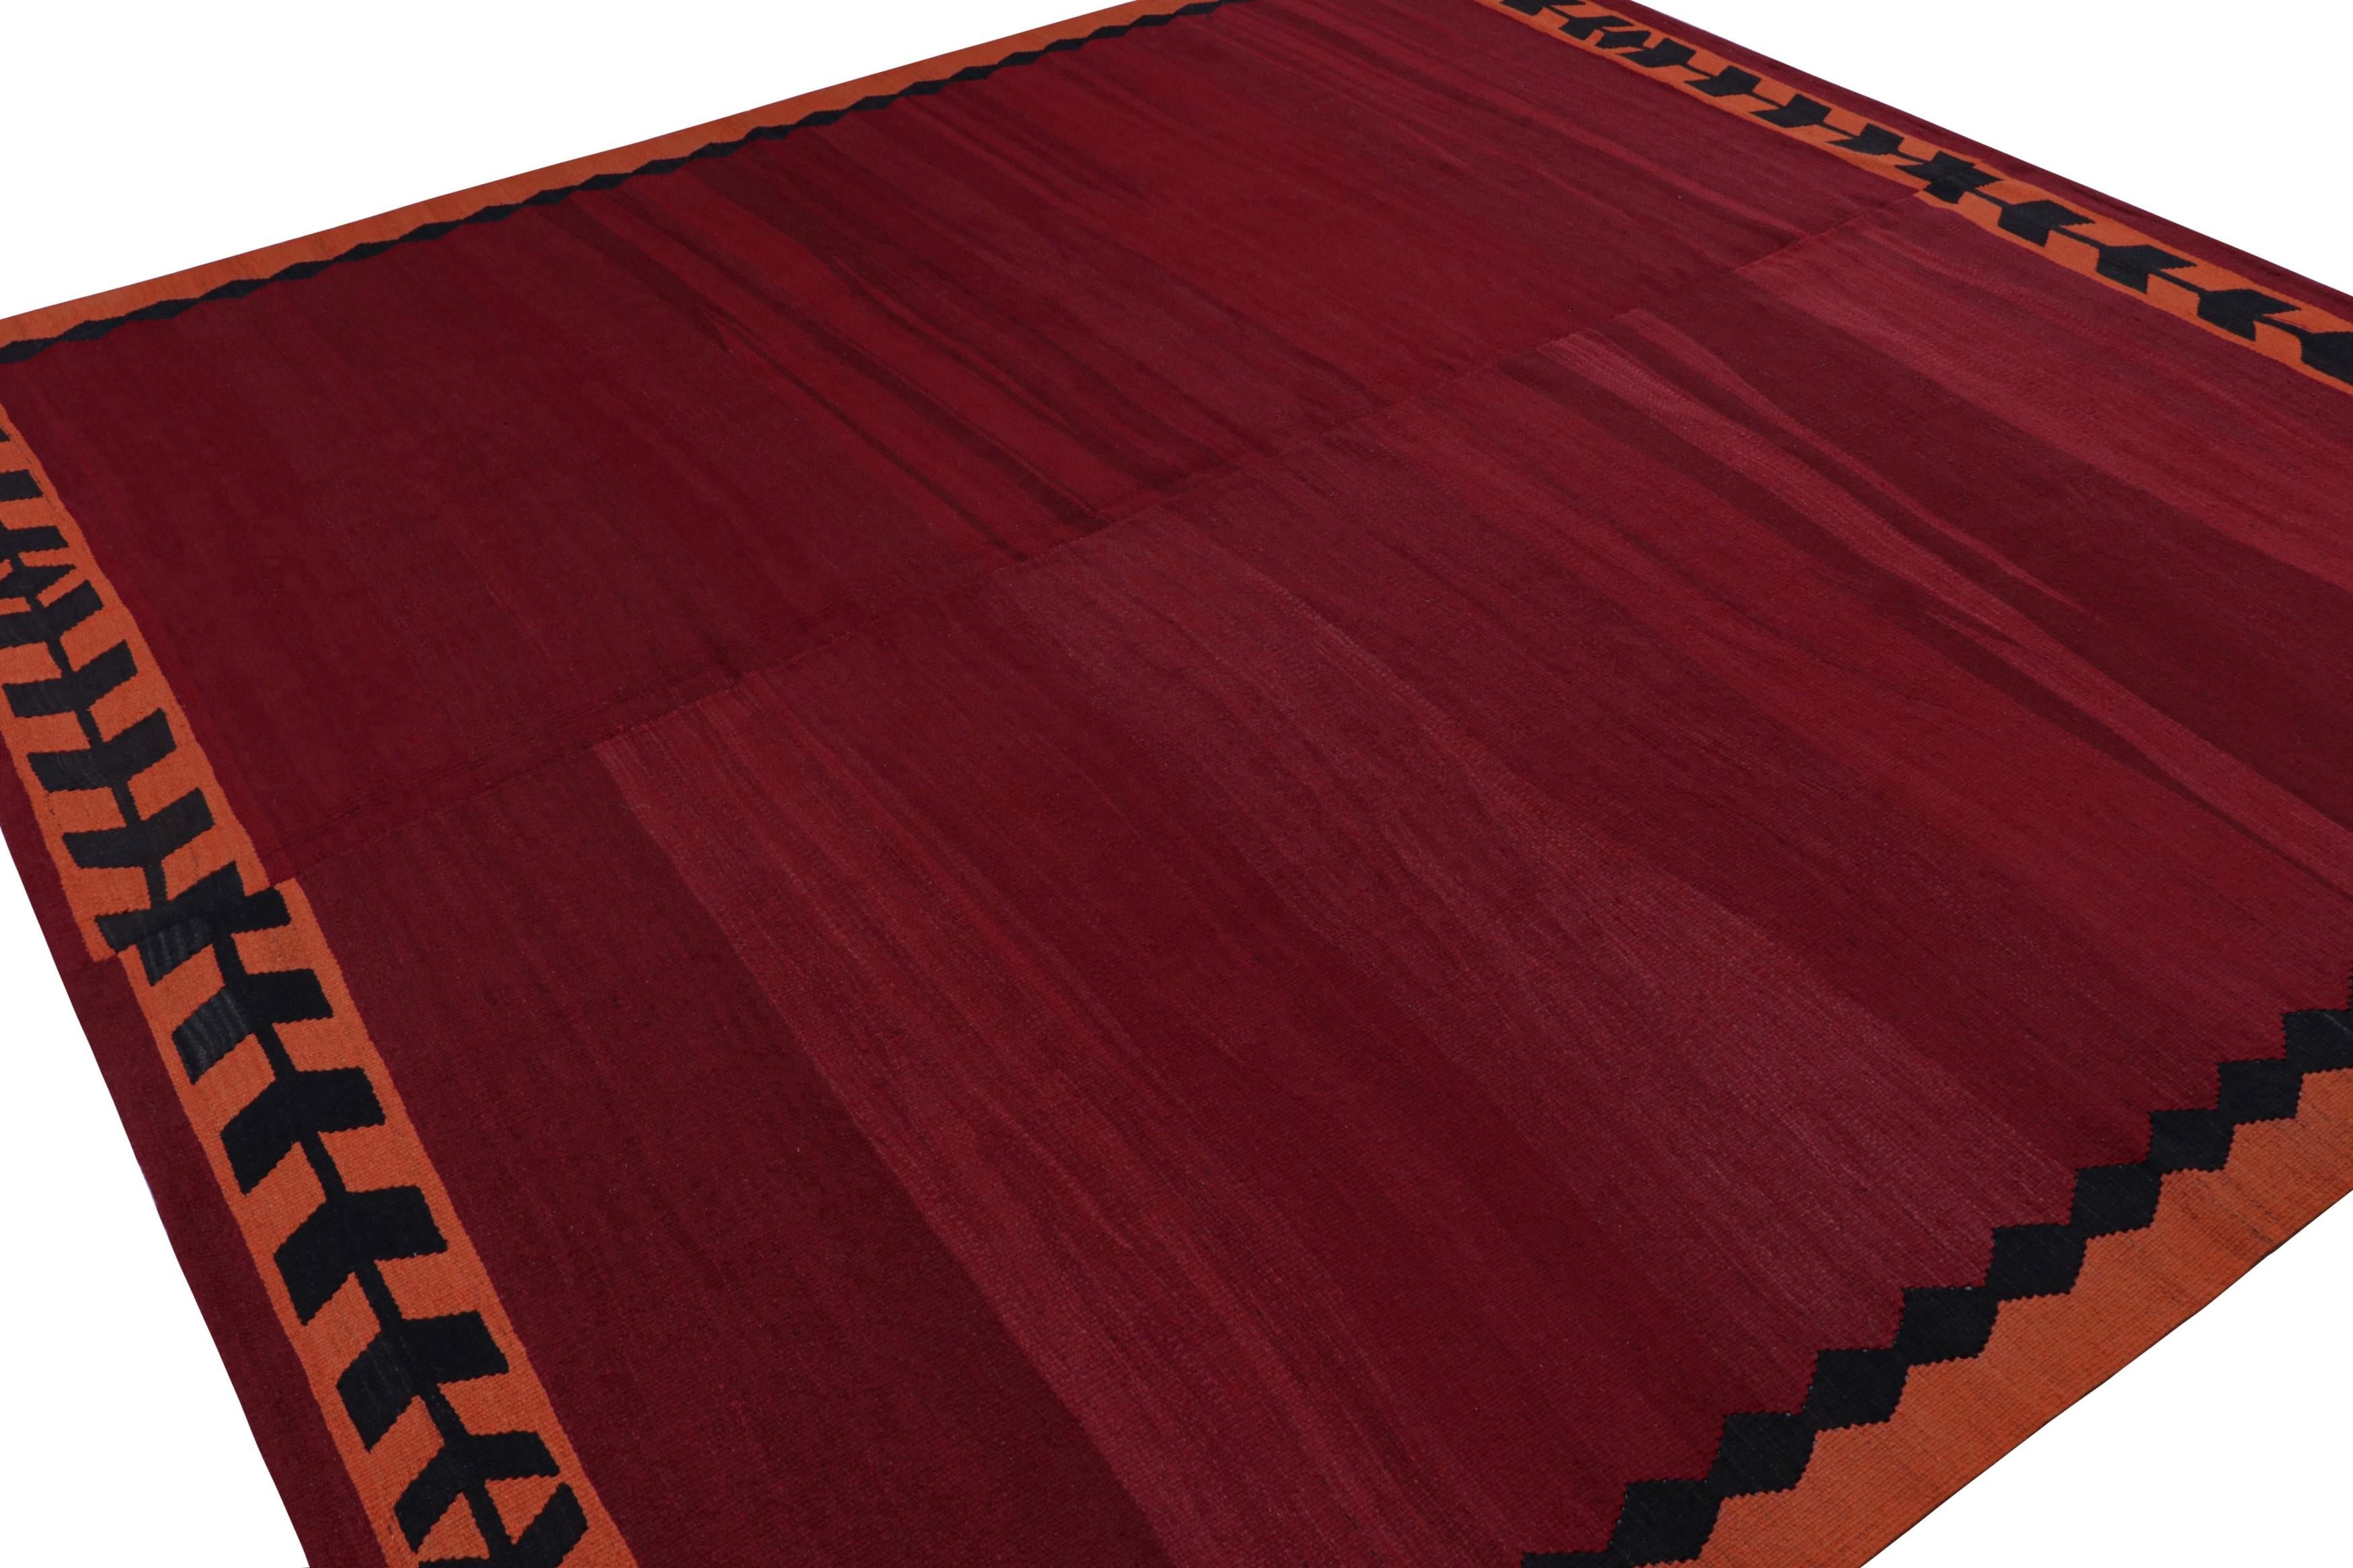 Handwoven in wool circa 1950-1960, this 10x10 vintage Afghan kilim is a new curation from Rug & Kilim’s collection. 

On the Design:

This particular rare piece enjoys a rich red open field with an extremely minimal border. The constitution embraces